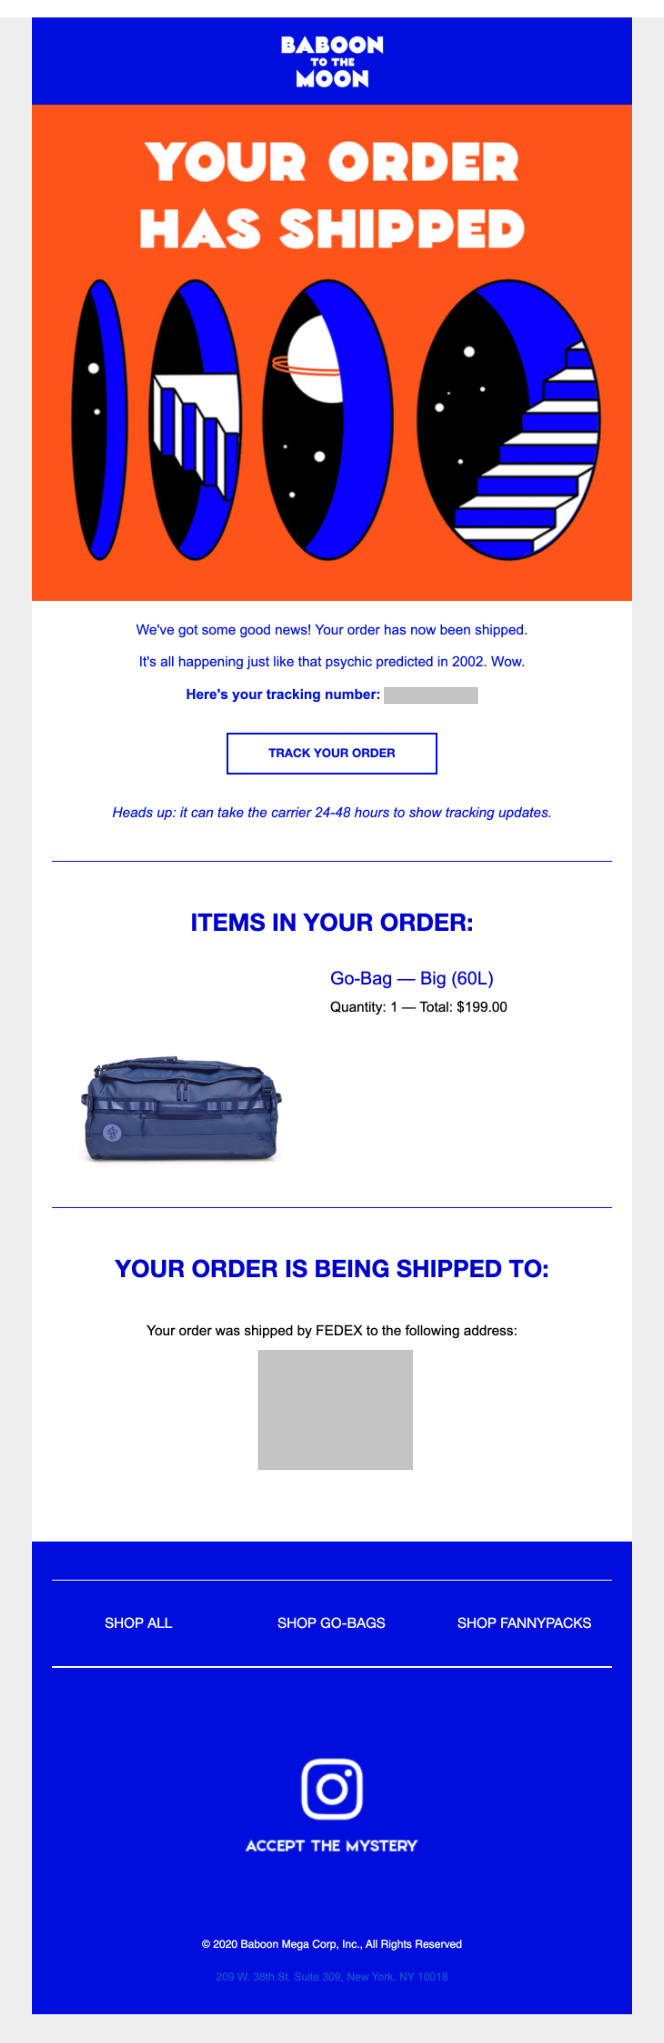 Baboon to the Moon Shipment Confirmation Email Template